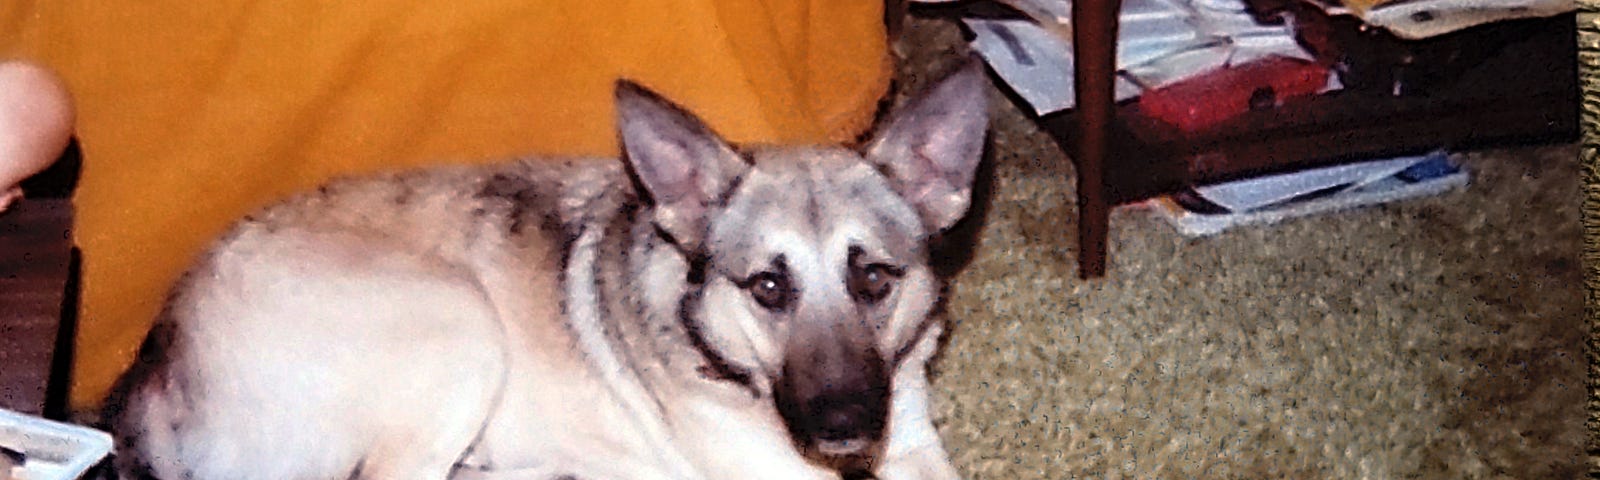 Old color photo of a German Sheppard mix dog sitting on the floor in front of a couch.